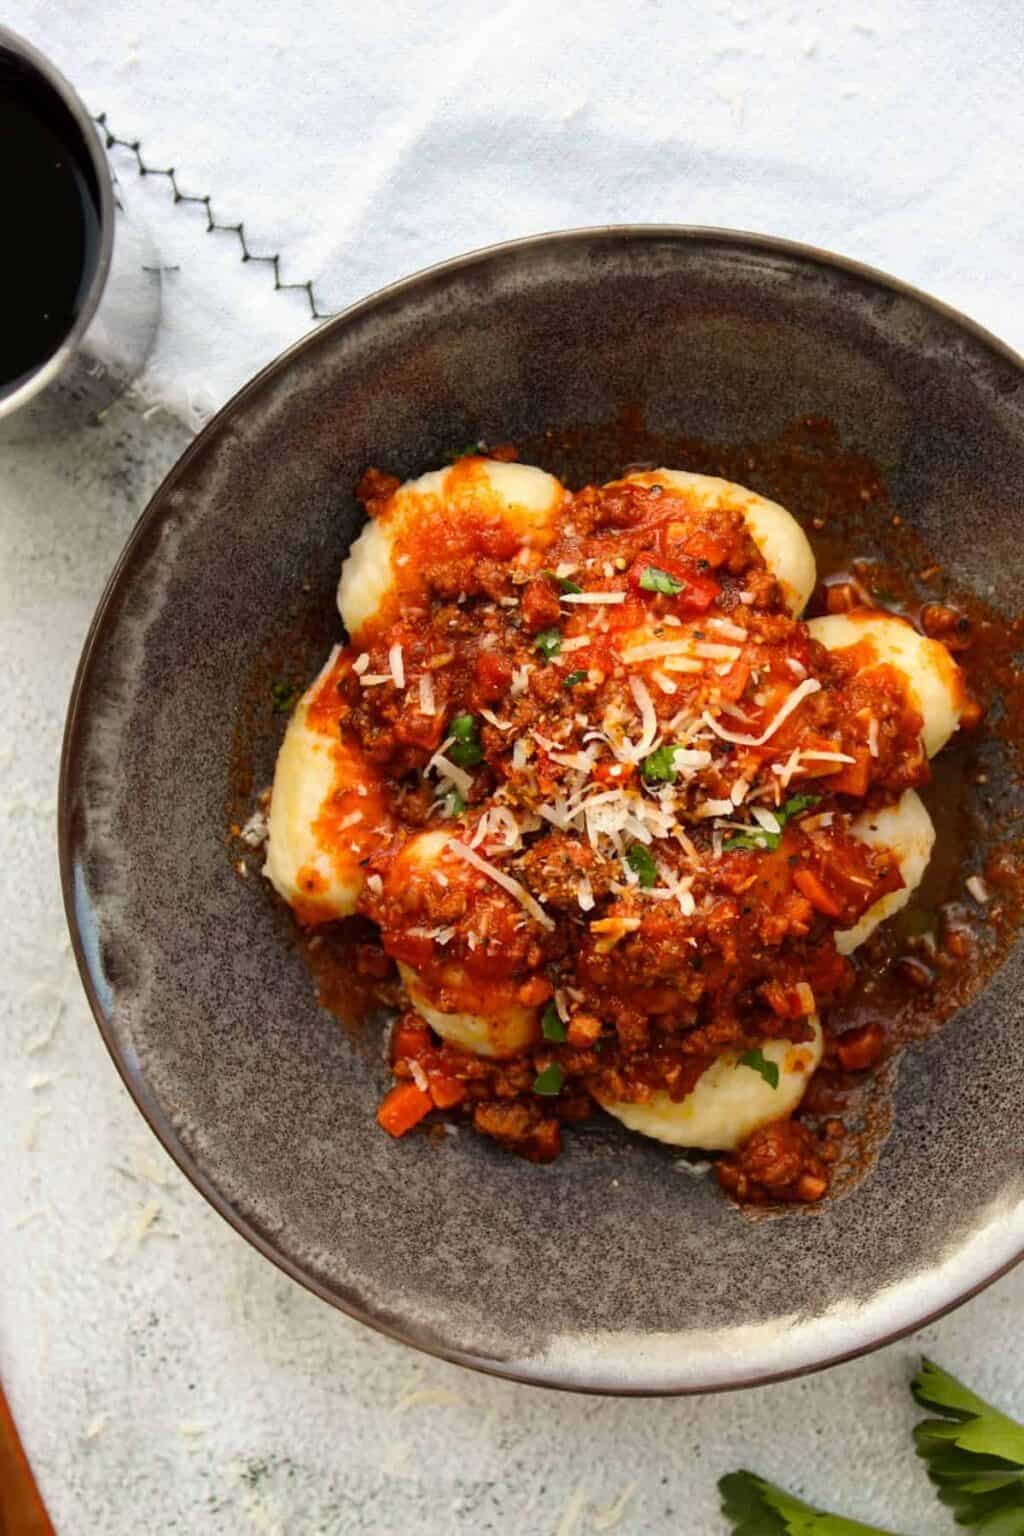 Homemade gnocchi bolognese in a charcoal bowl on a white towel.